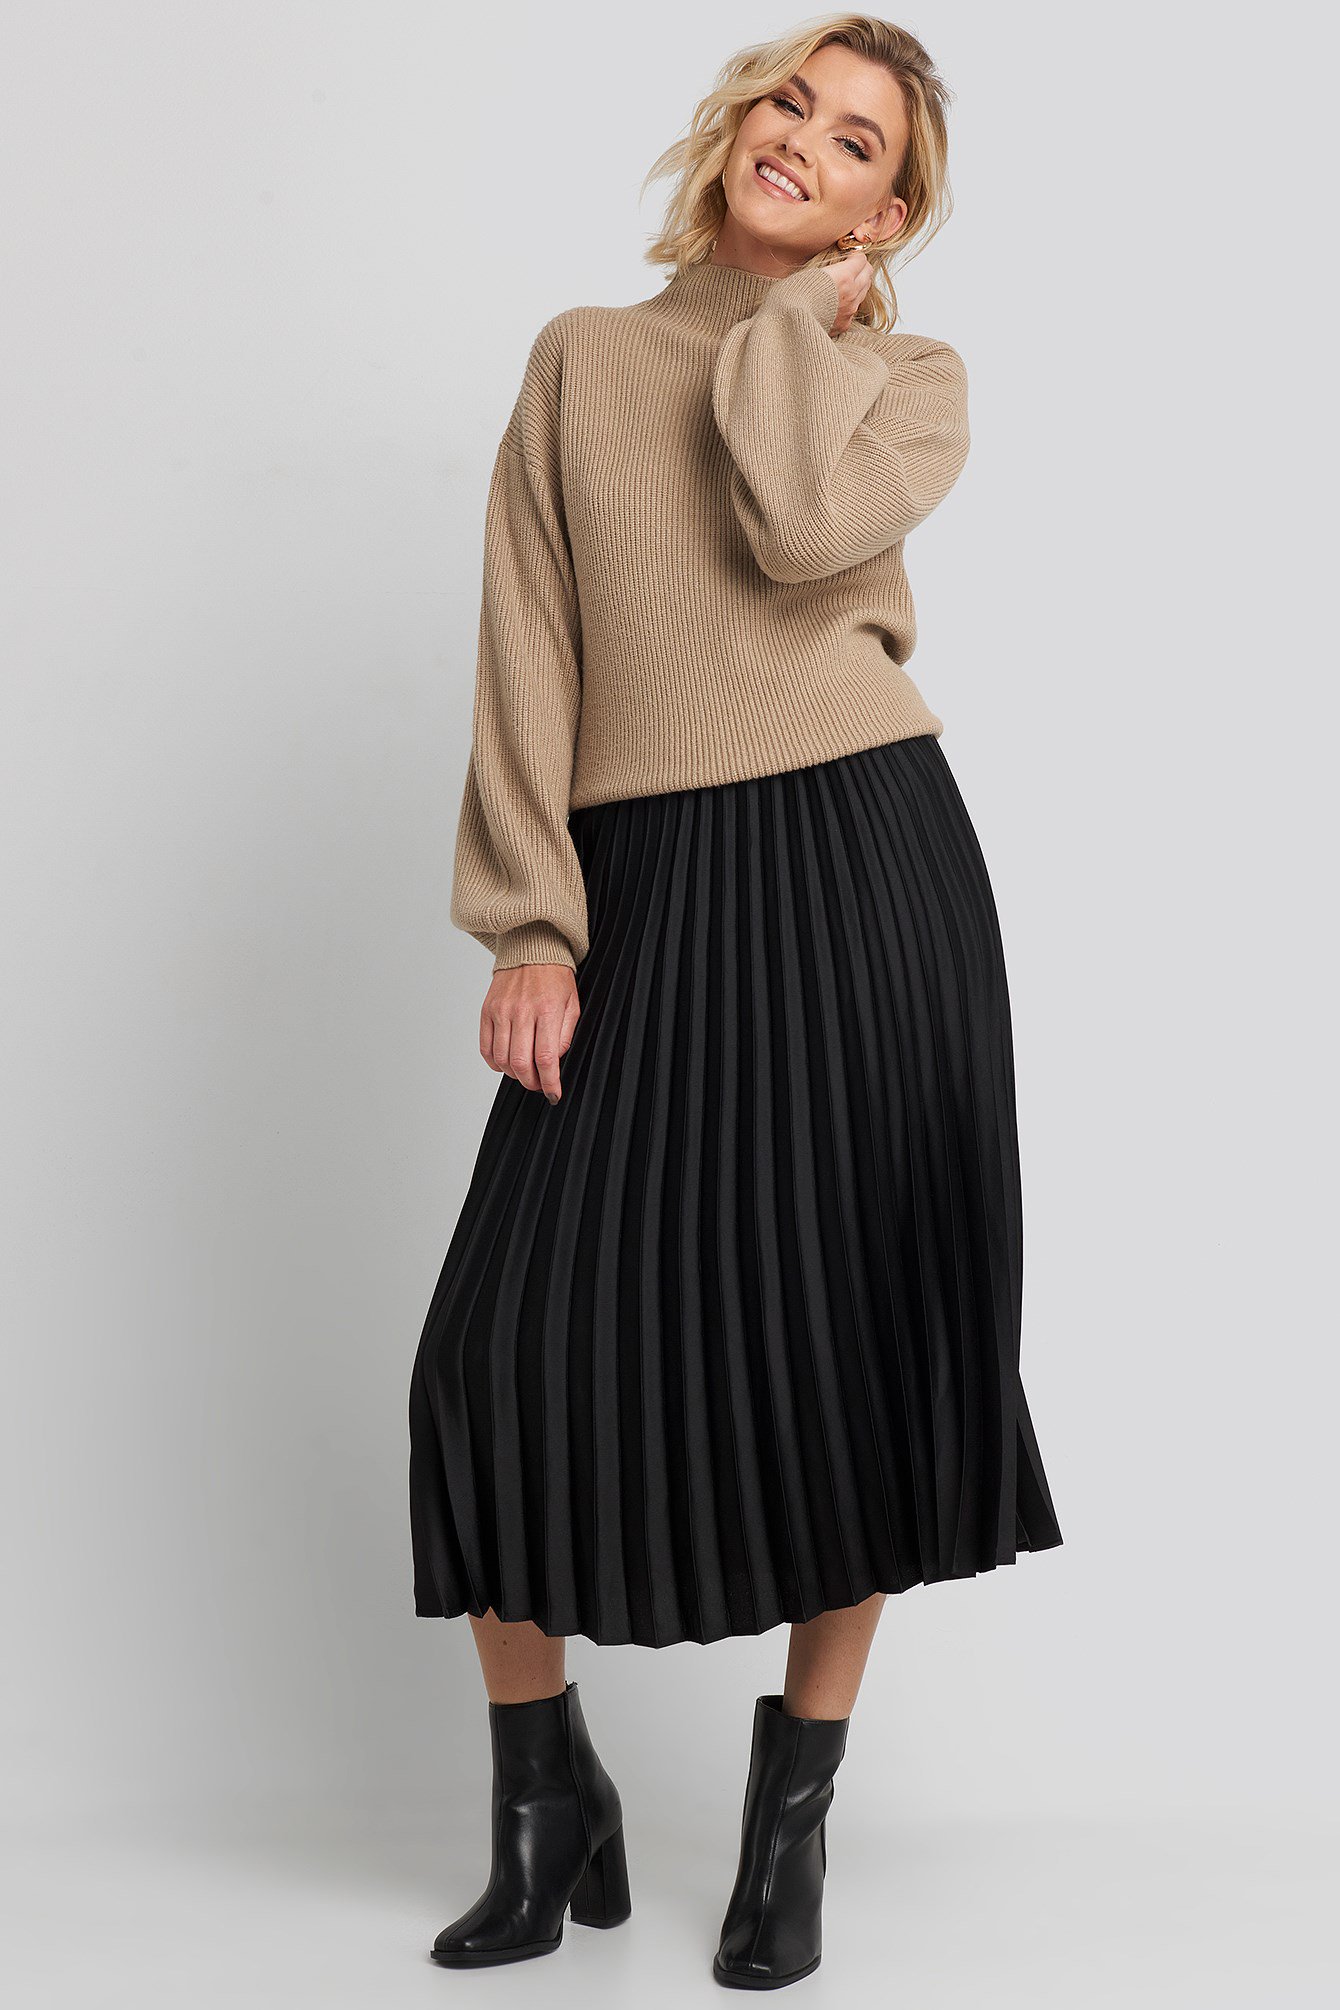 Catia Skirt Black Outfit